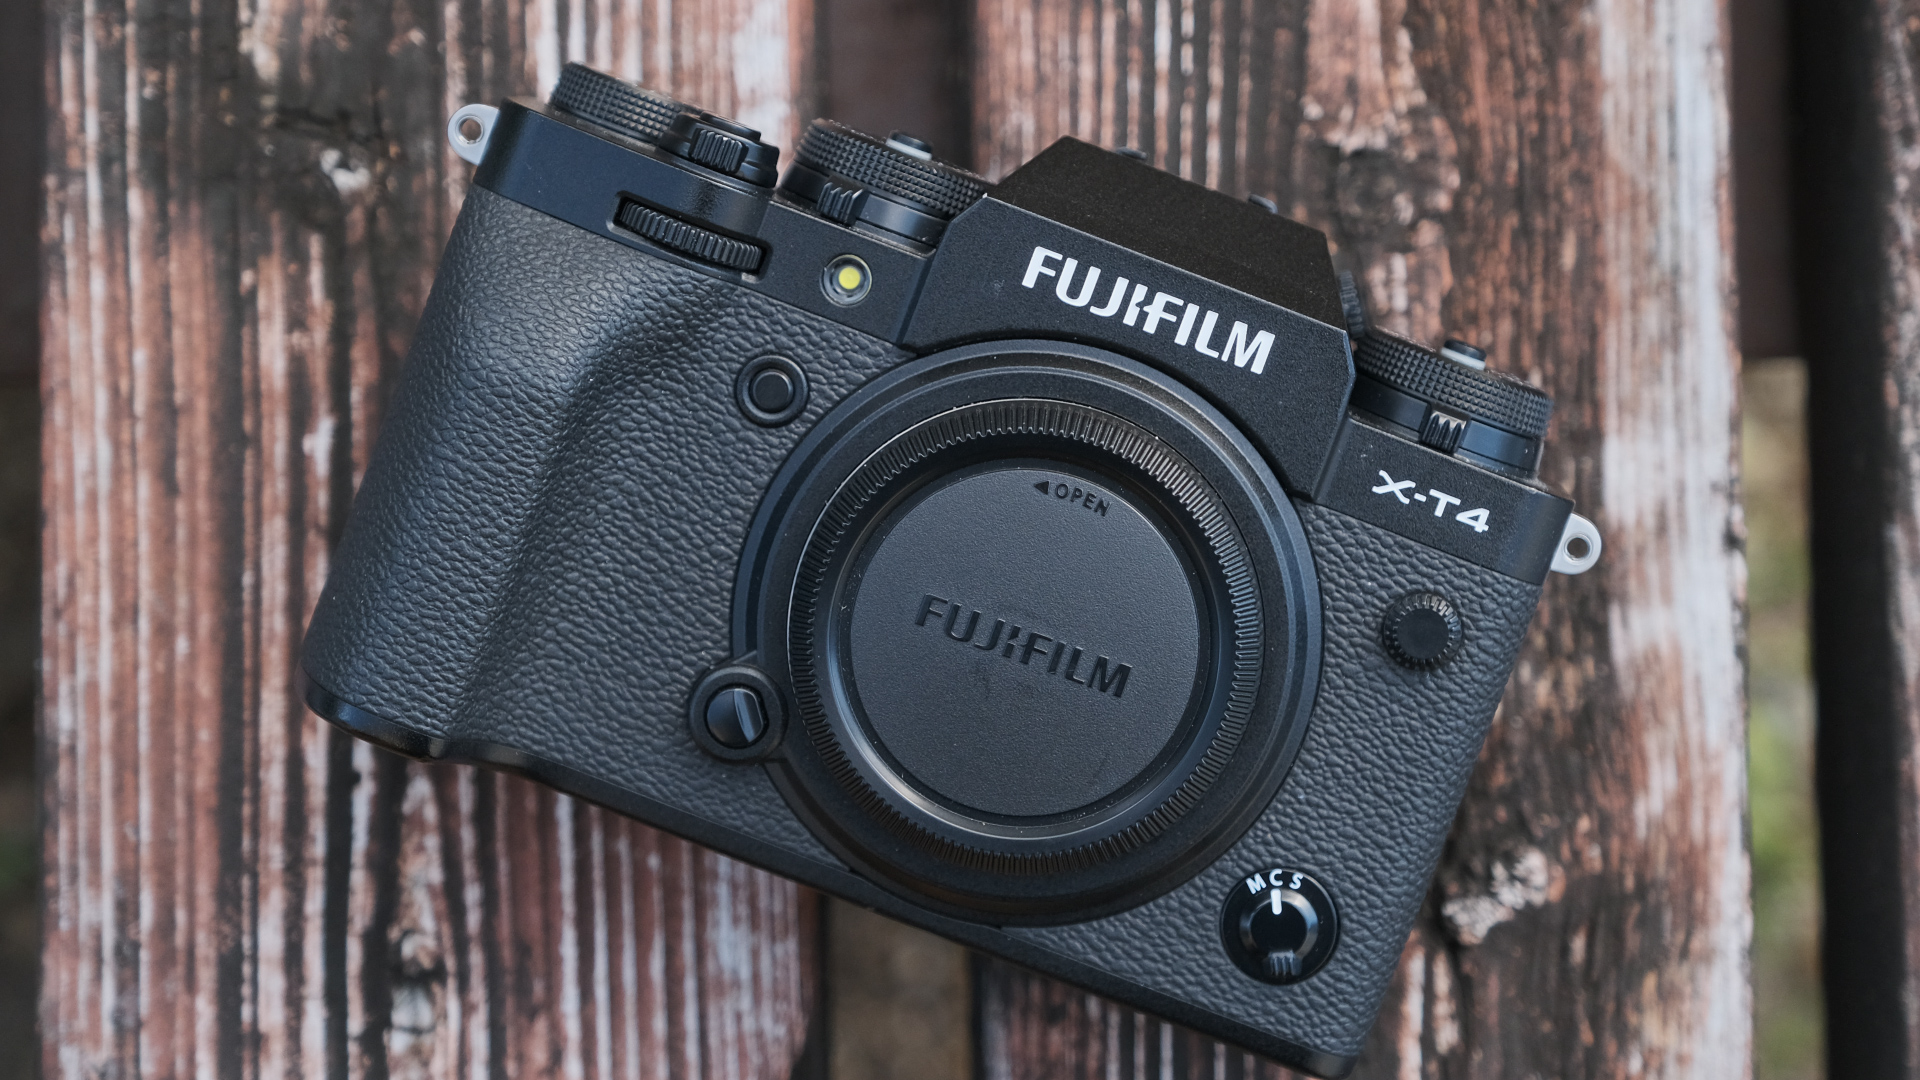 FUJIFILM X-T4 Hands-on Review - The Good Has Just Become Much